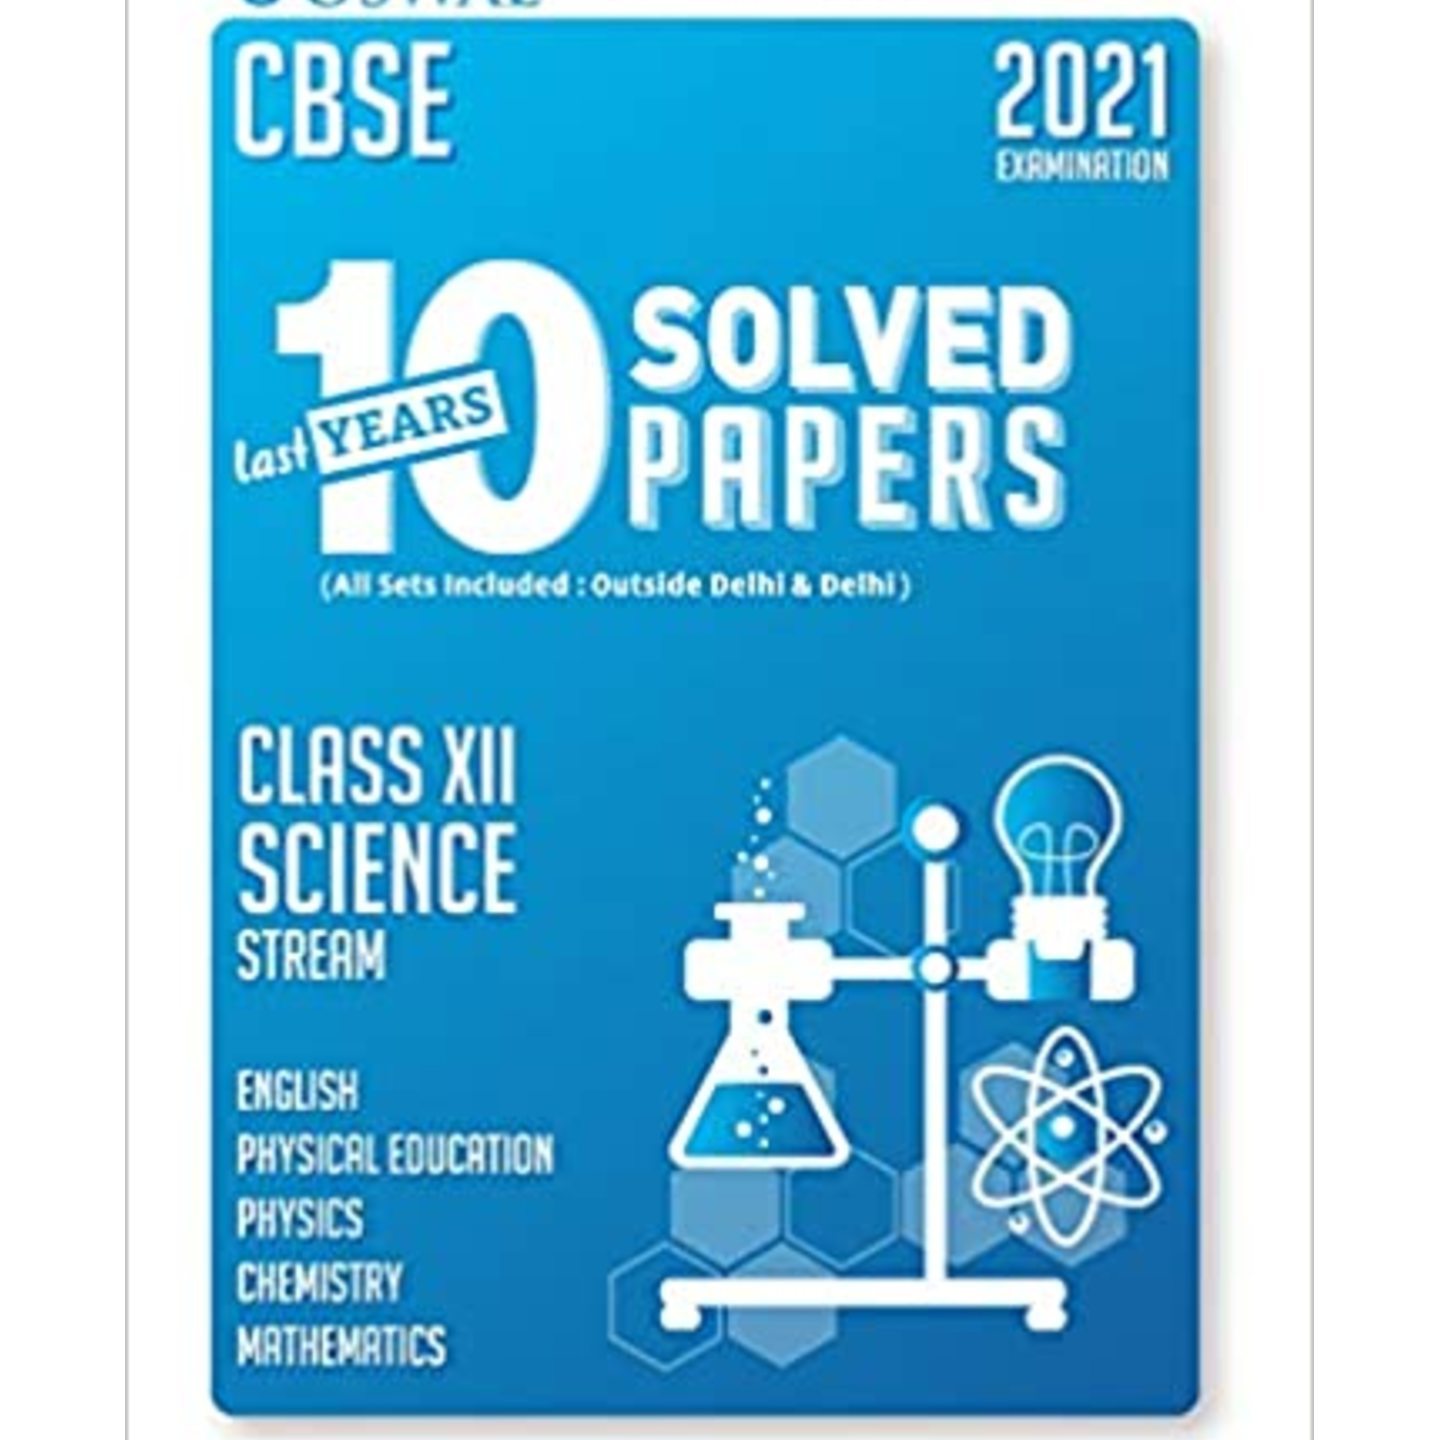 10 Last Years Solved Papers - Science PCM  0SWAALCBSE Class 12